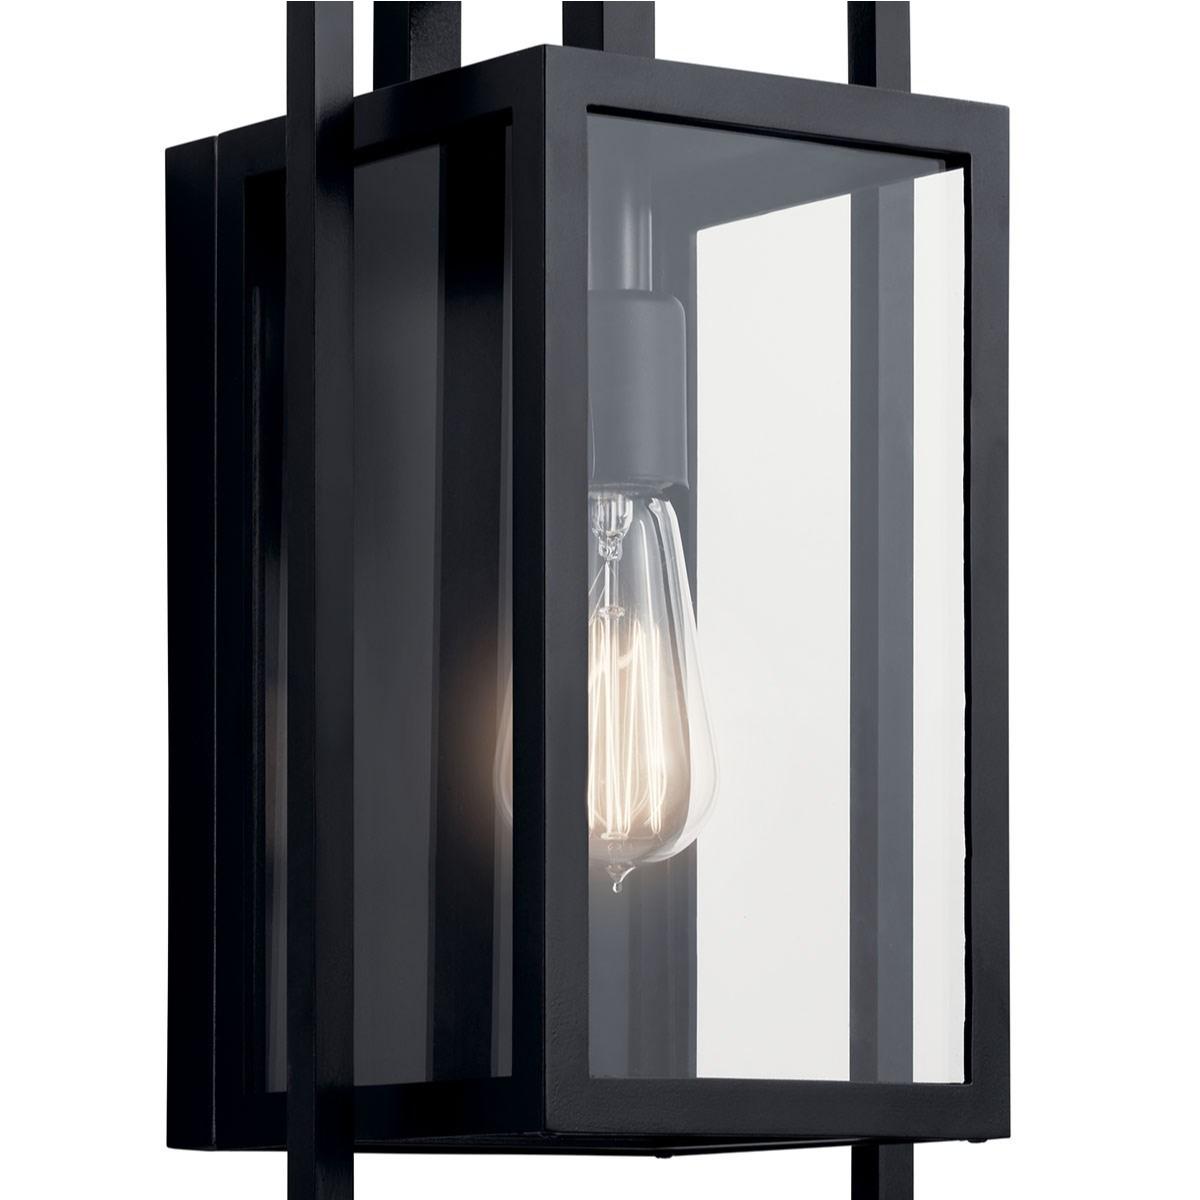 Goson 16 in. Outdoor Wall Sconce Black Finish